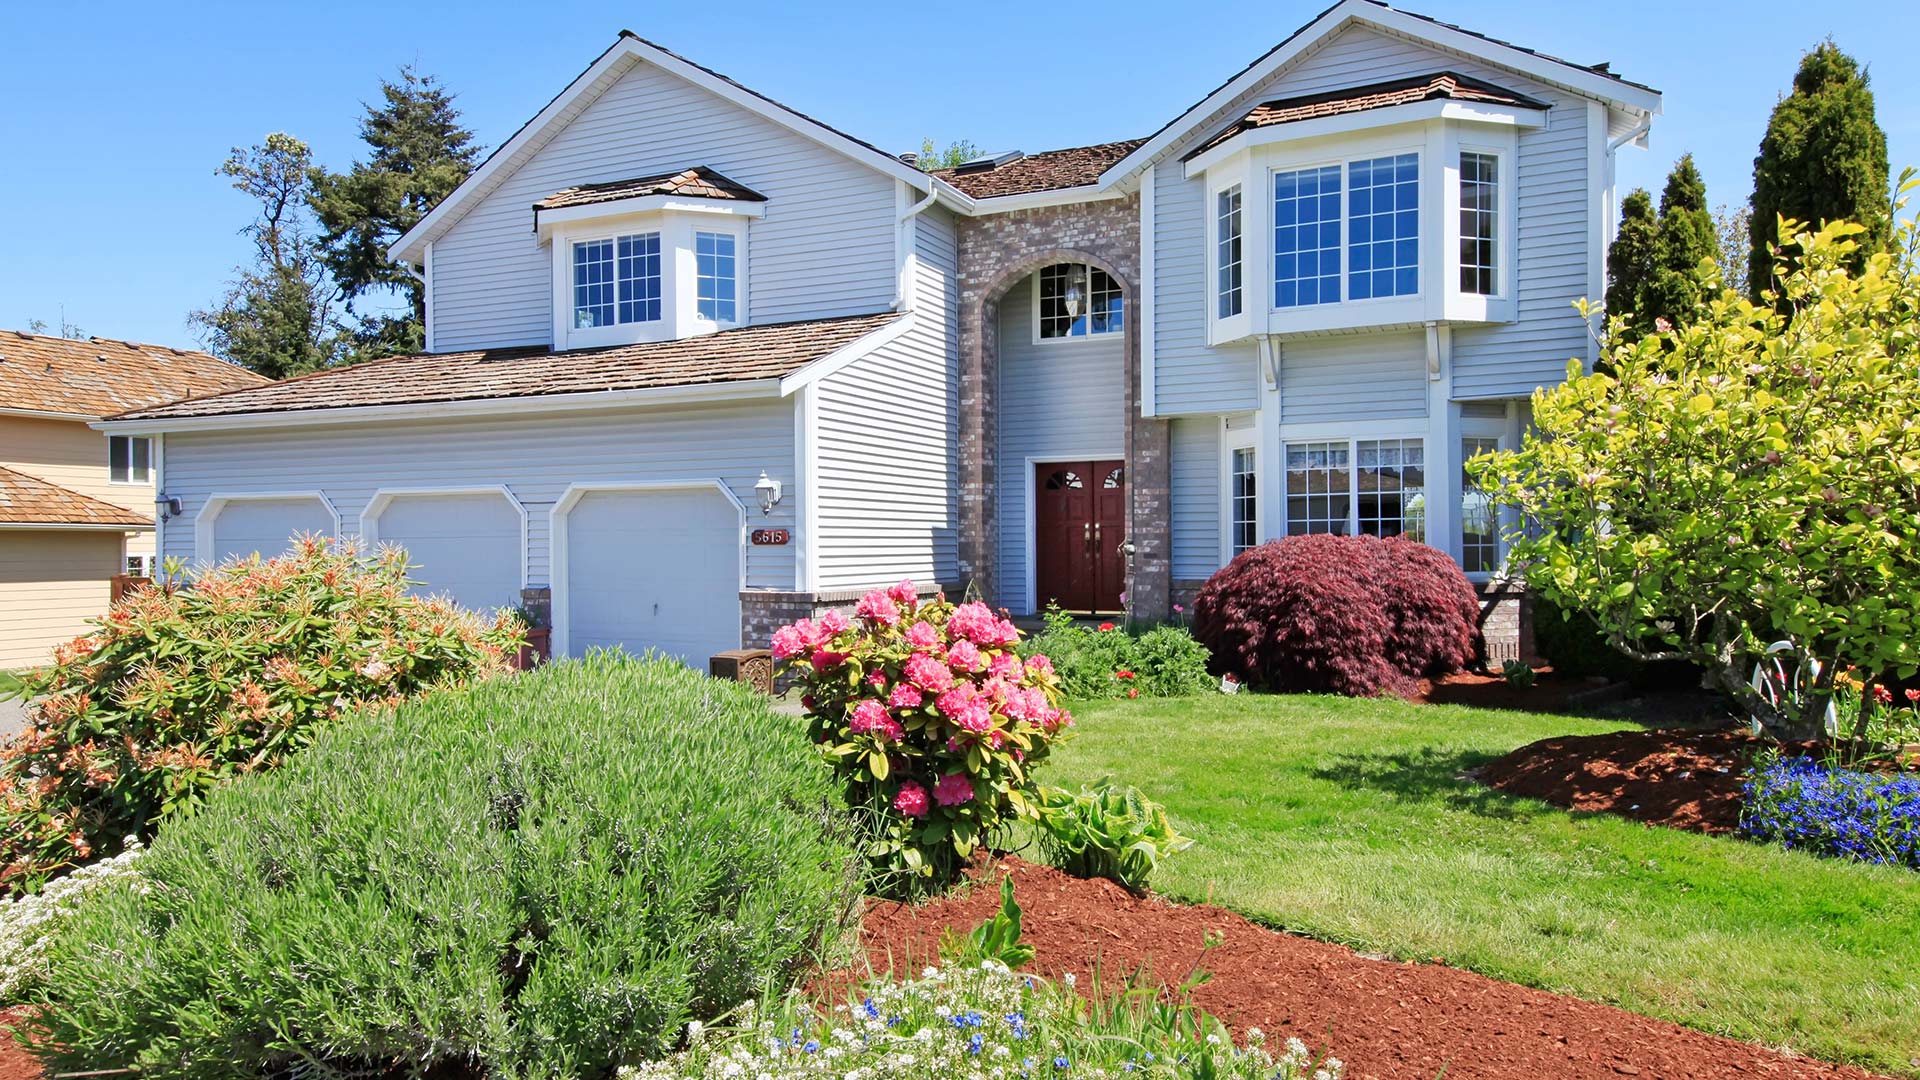 A home with regular landscape maintenance in Oregon City, OR.